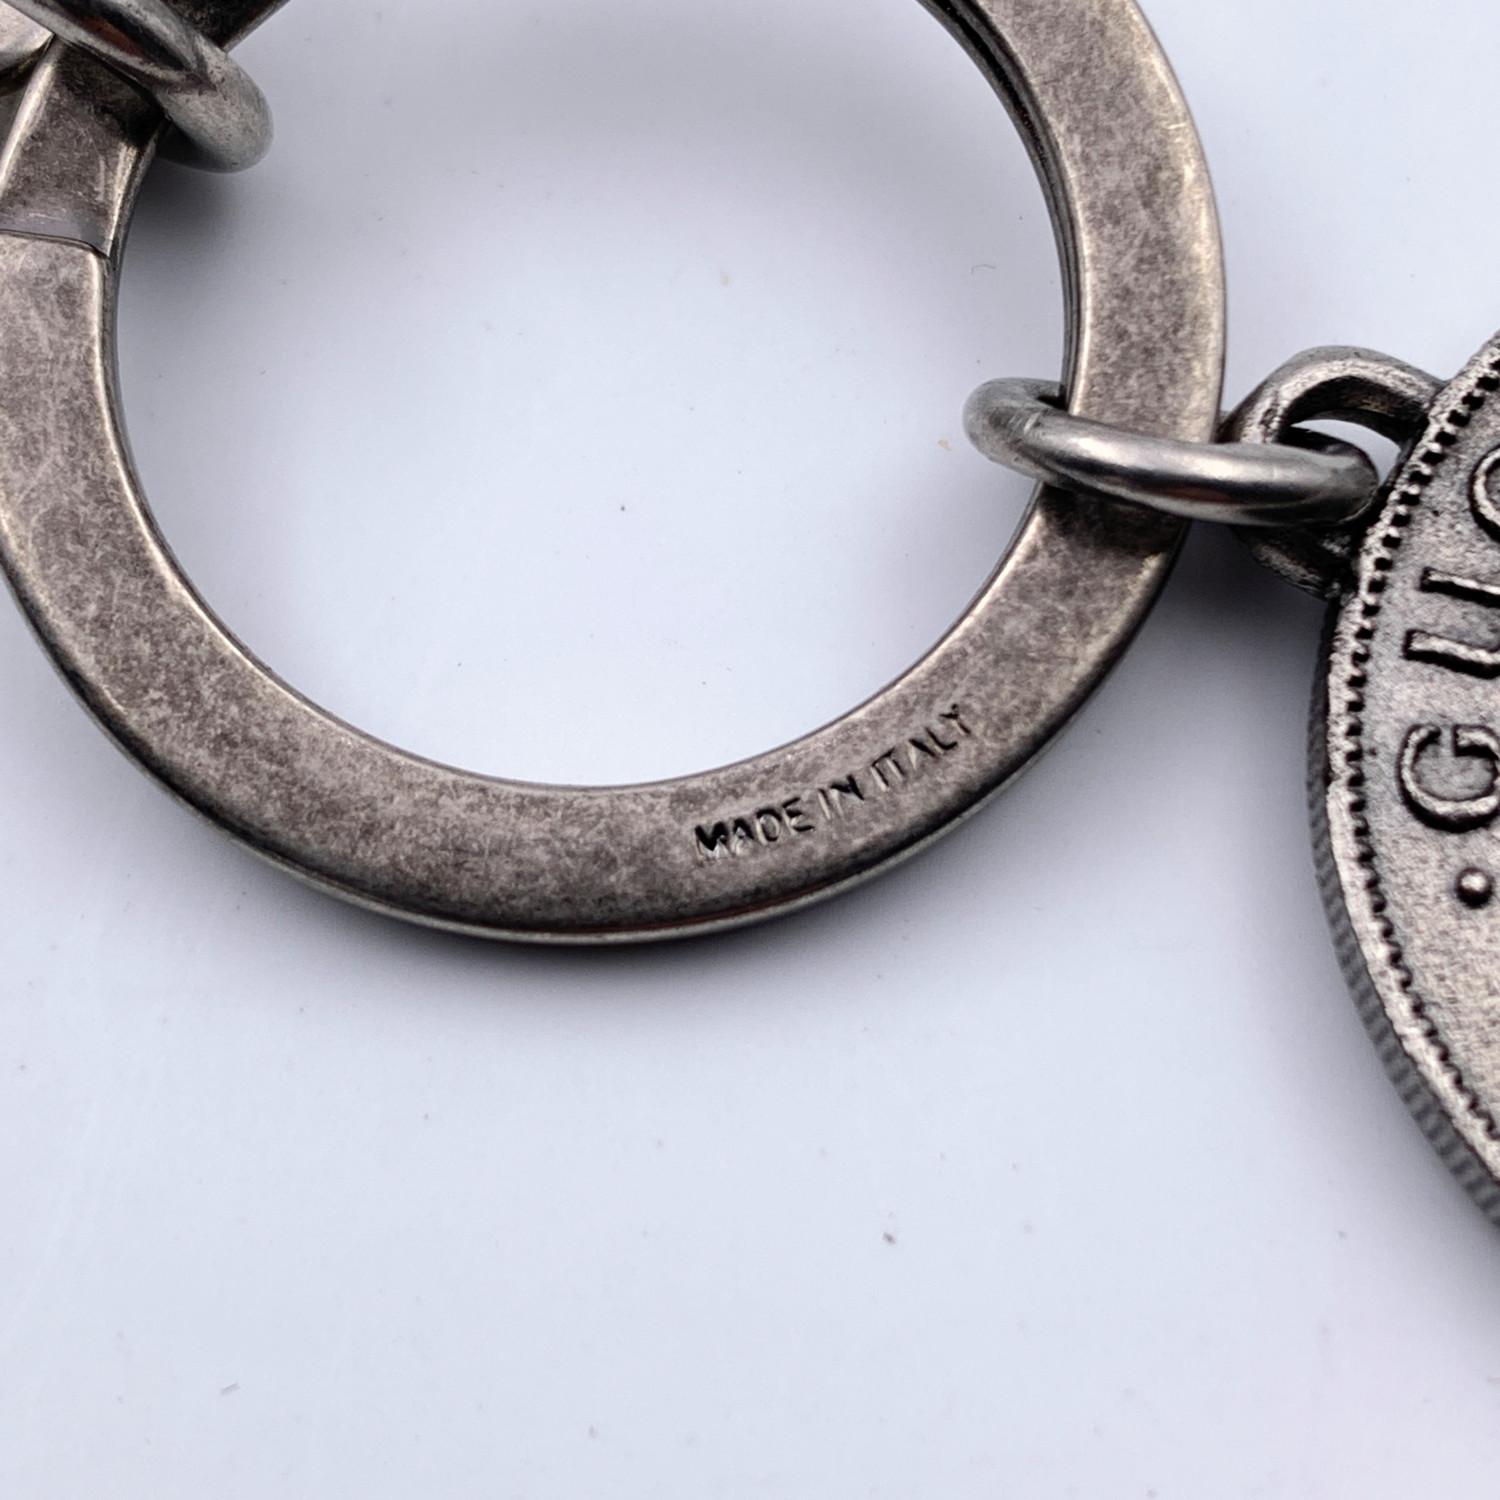 Gucci keyring in aged silver metal. Round coin charm with embossed tiger head with 'L'Aveugle Par Amour -1921' on front. Gucci logo with number 25, 2 bees, and the 'Loved' writing on the back. Gucci engraved on clasp and ring. Total length: 4.5